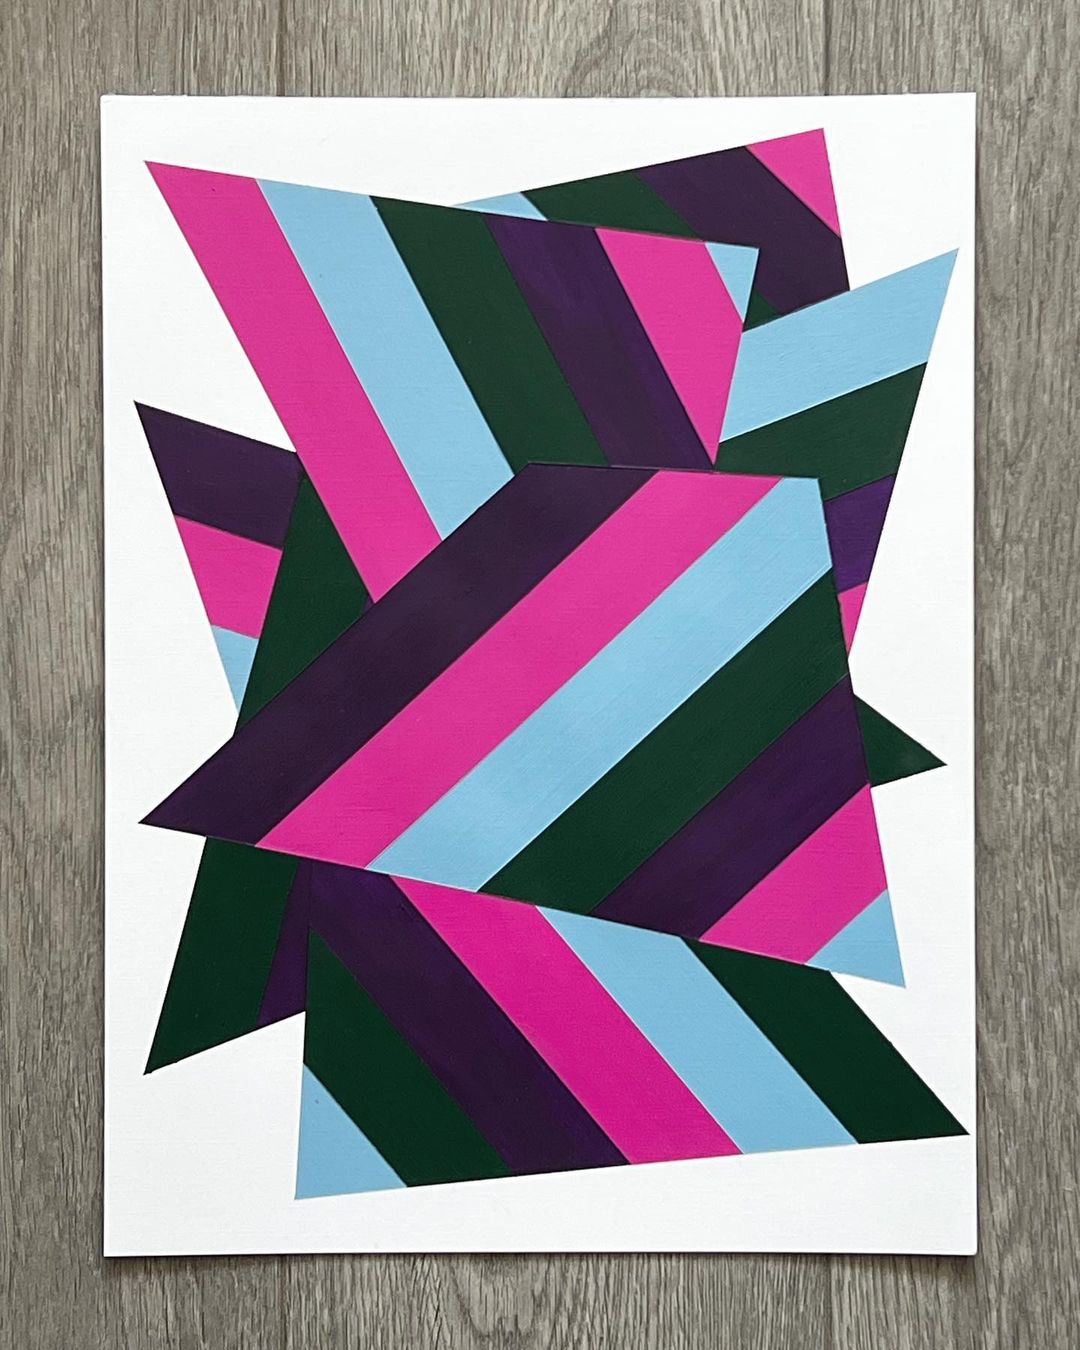 4. @chris_daniels_art abstract geometric artwork with layered, striped trapeziums